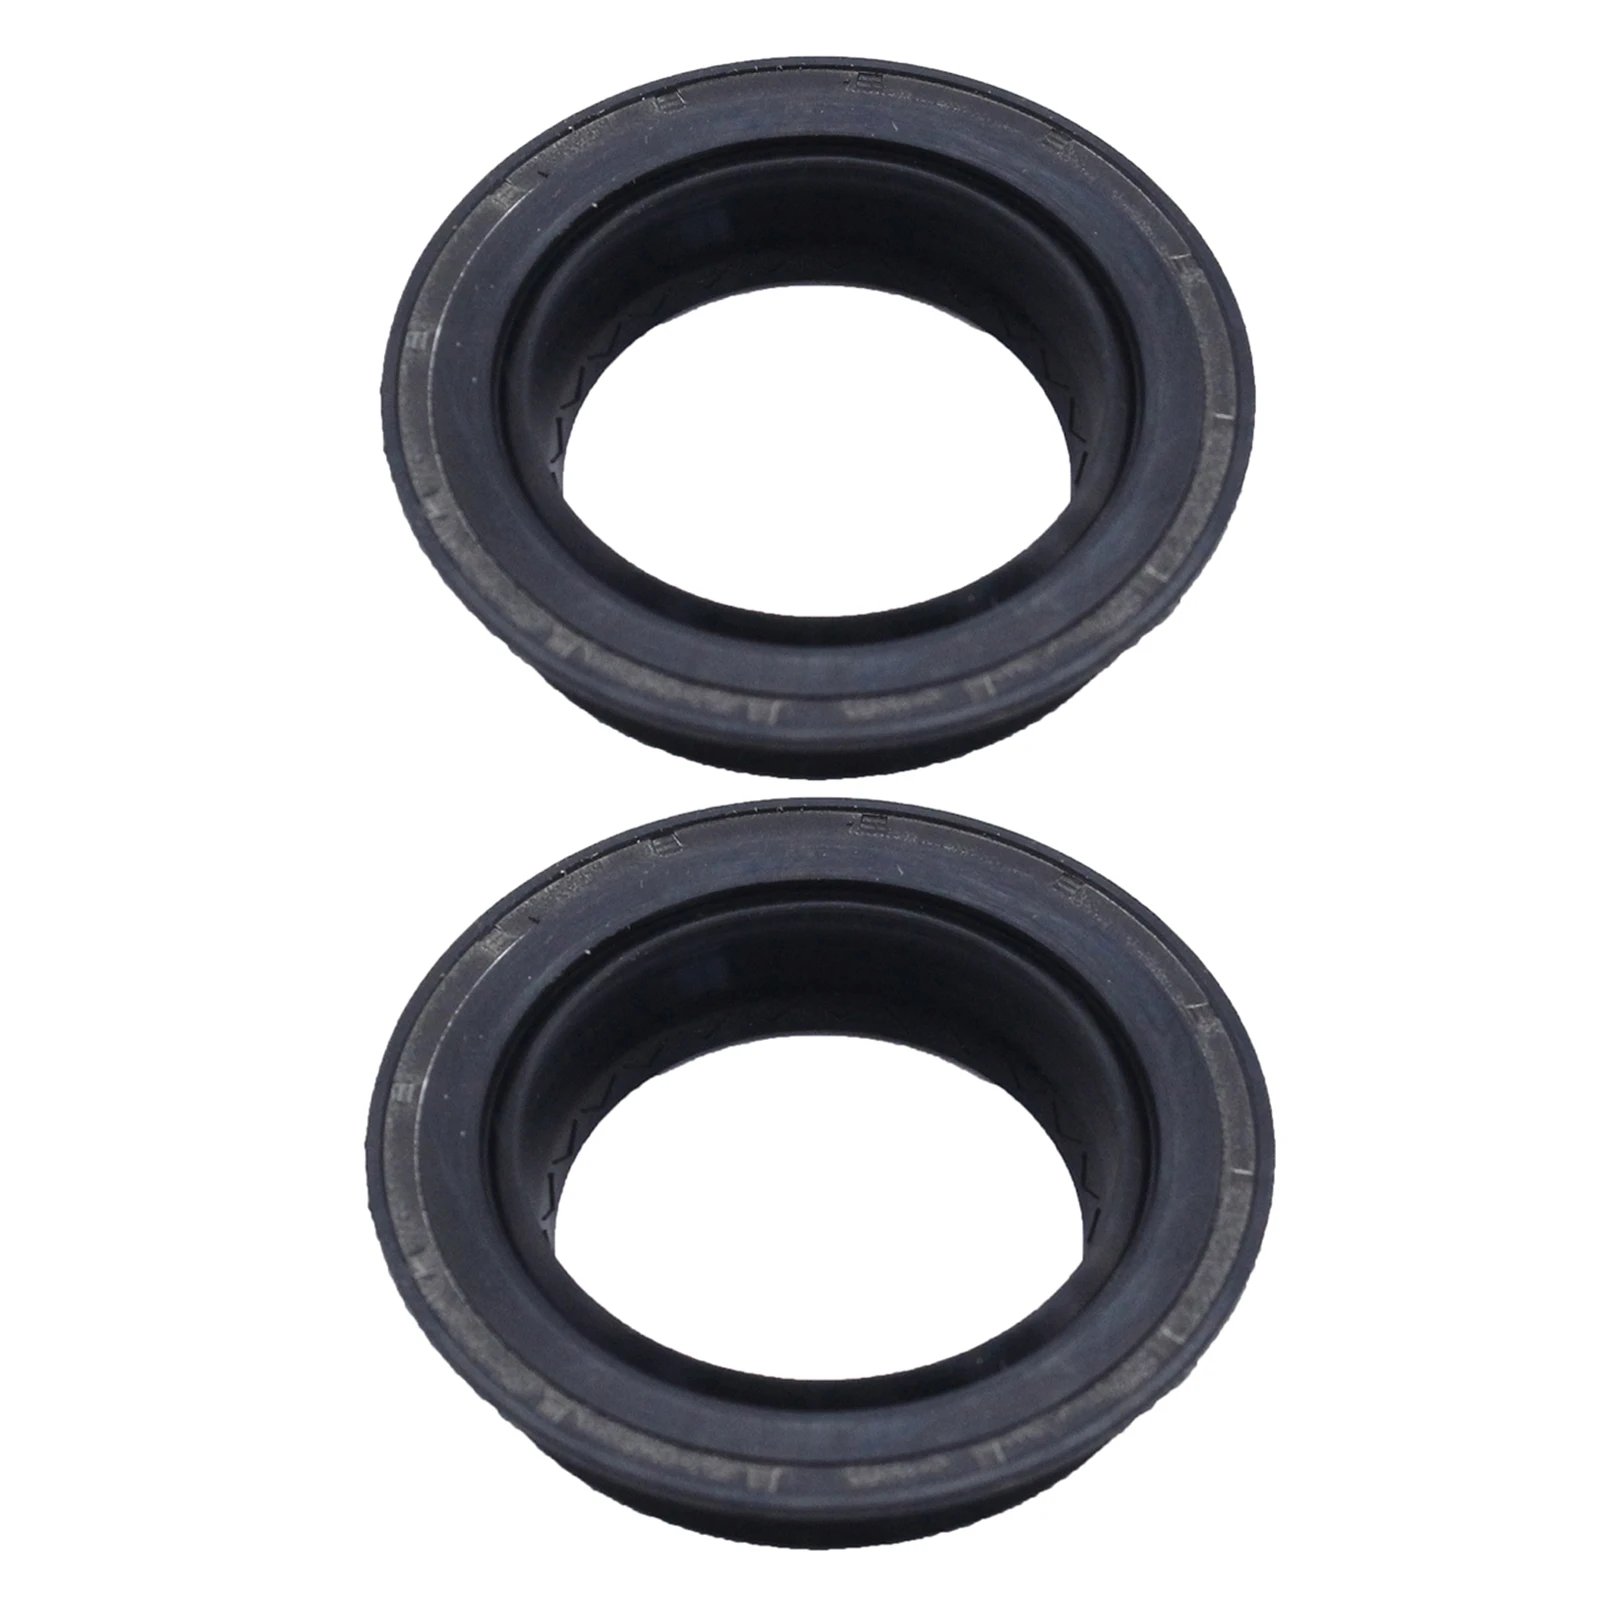 2x 303752-KIT 40533-01J00 Trail Safe Front Axle Seal Oil Seal Kit Vehicle Interior Moulding Supplies Fit for Patrol Y60 Y61